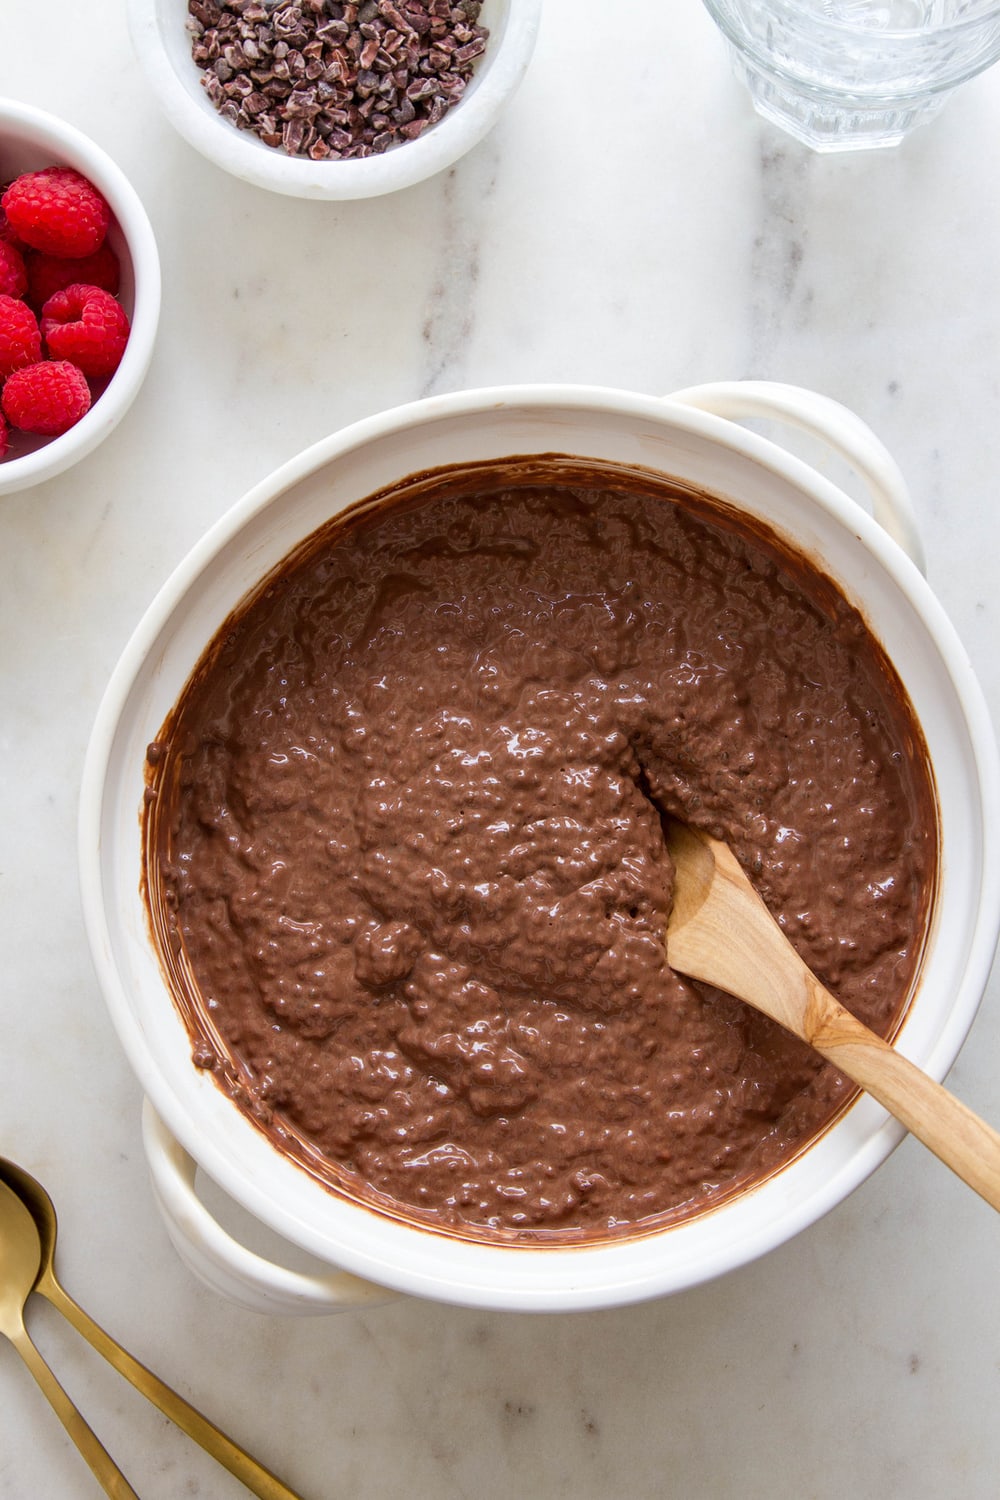 CHOCOLATE CHIA PUDDING: CHILLED